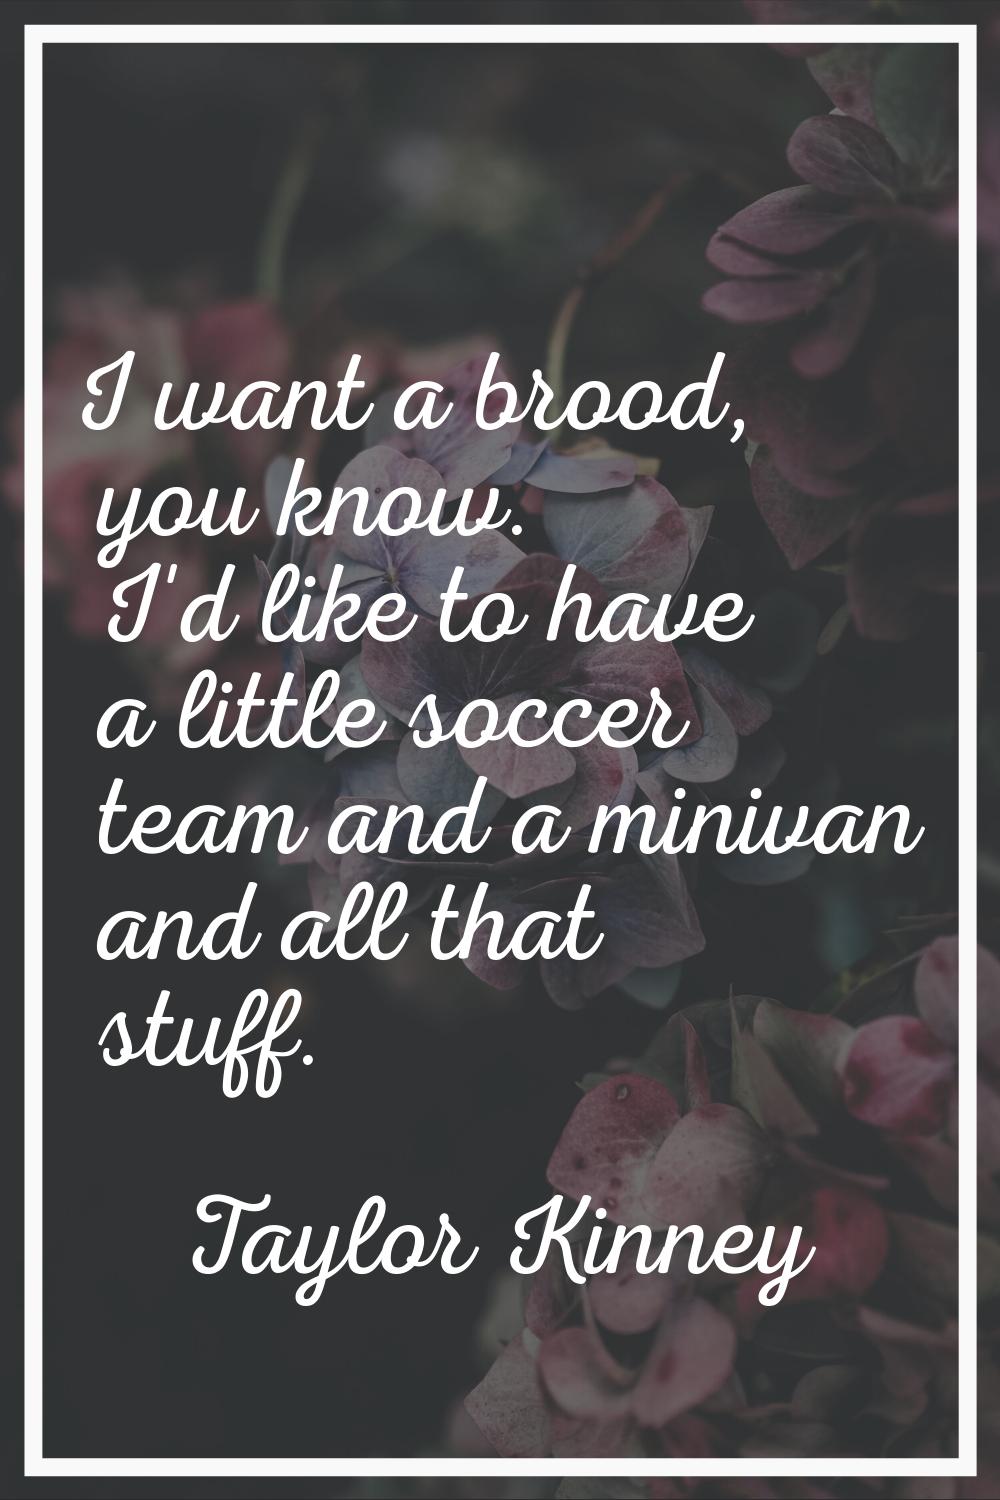 I want a brood, you know. I'd like to have a little soccer team and a minivan and all that stuff.